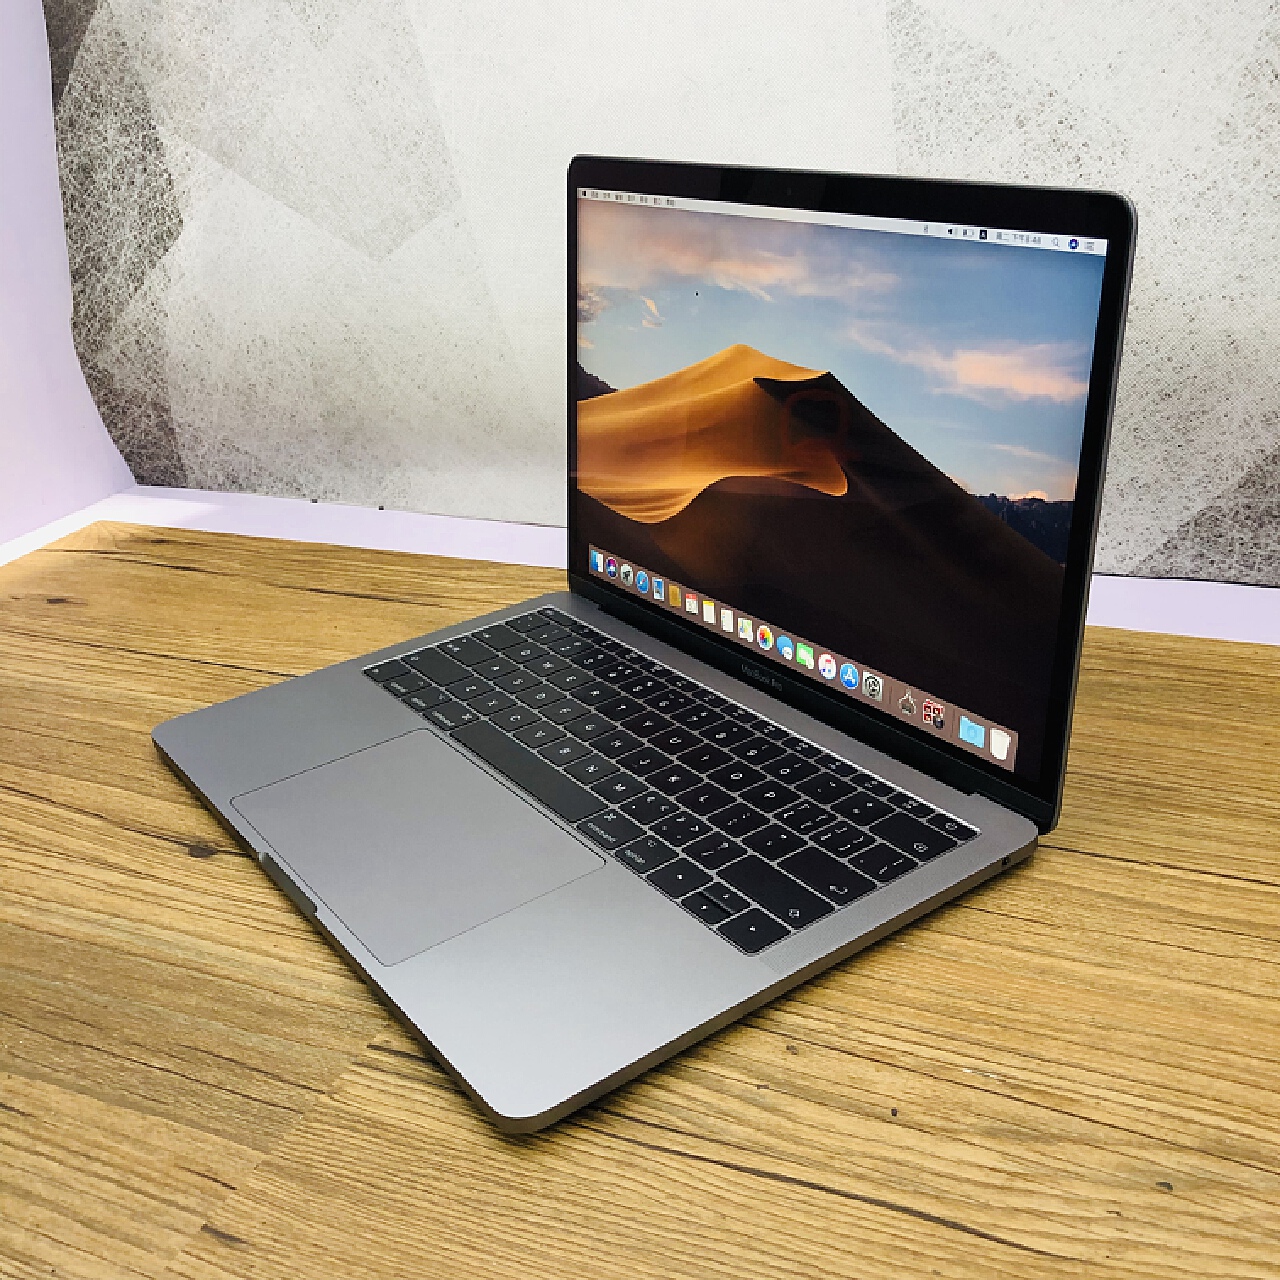 Refurbished Late-2013 MacBook Pro Now For Sale in Apple's Online Store